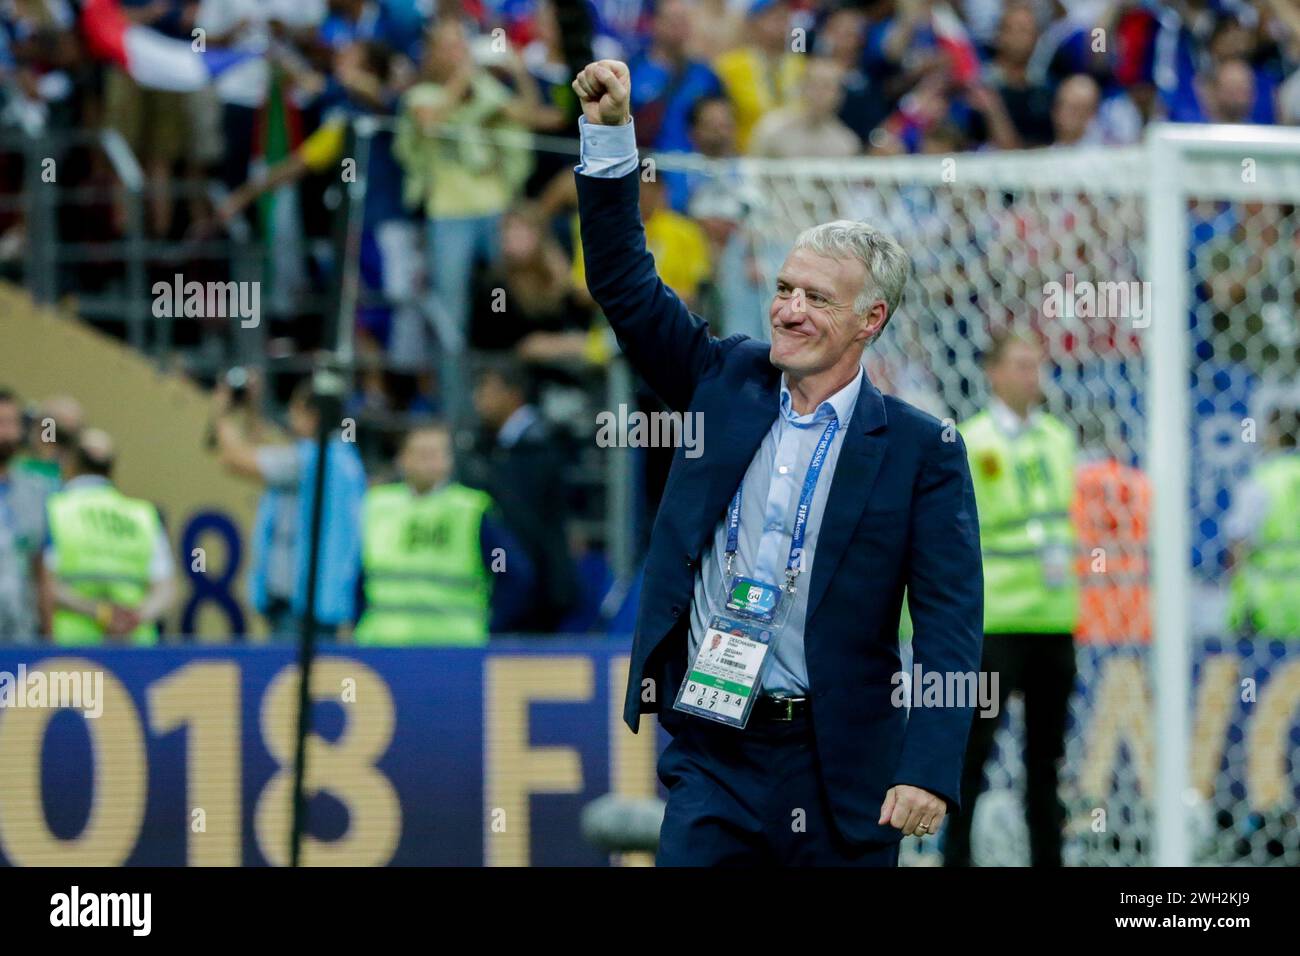 Coach Didier Deschamps of France celebrates winning the victory during the FIFA World Cup 2018 Final match between France and Croatia at Luzhniki Stadium. Final score: France 4:2 Croatia. (Photo by Grzegorz Wajda / SOPA Images/Sipa USA) Stock Photo